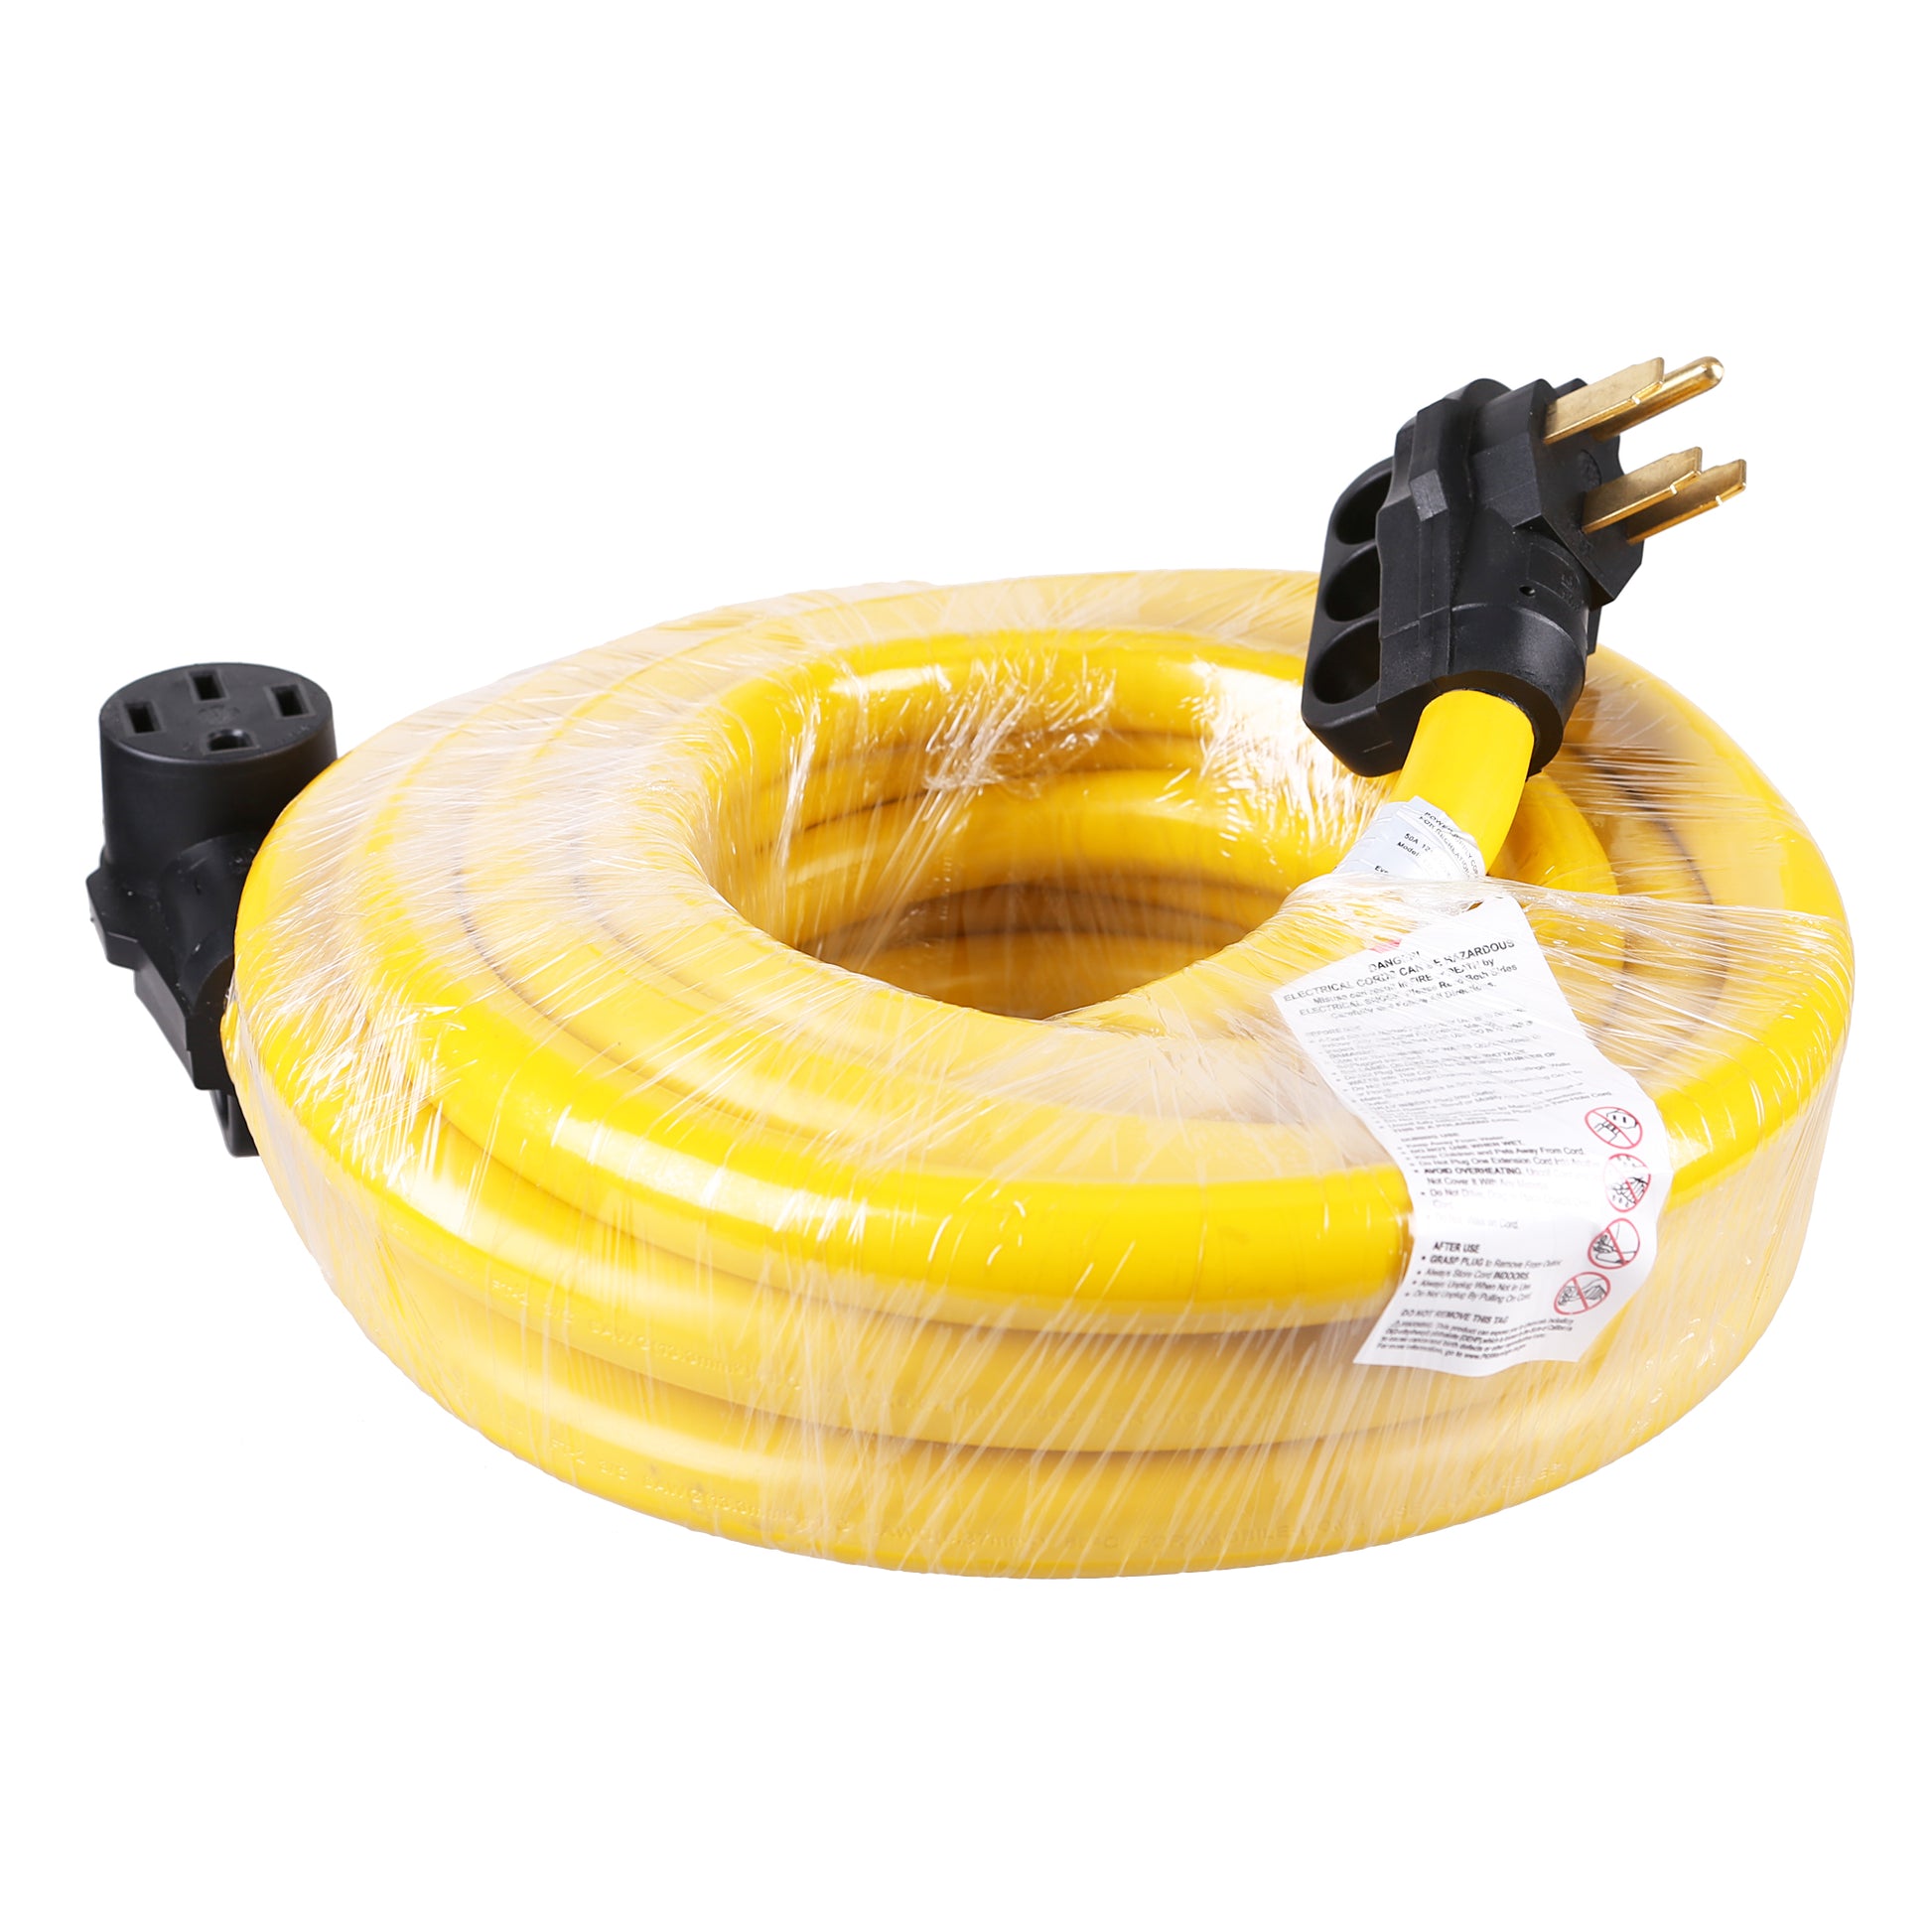 50 Amp Cable for RV extesnion cord